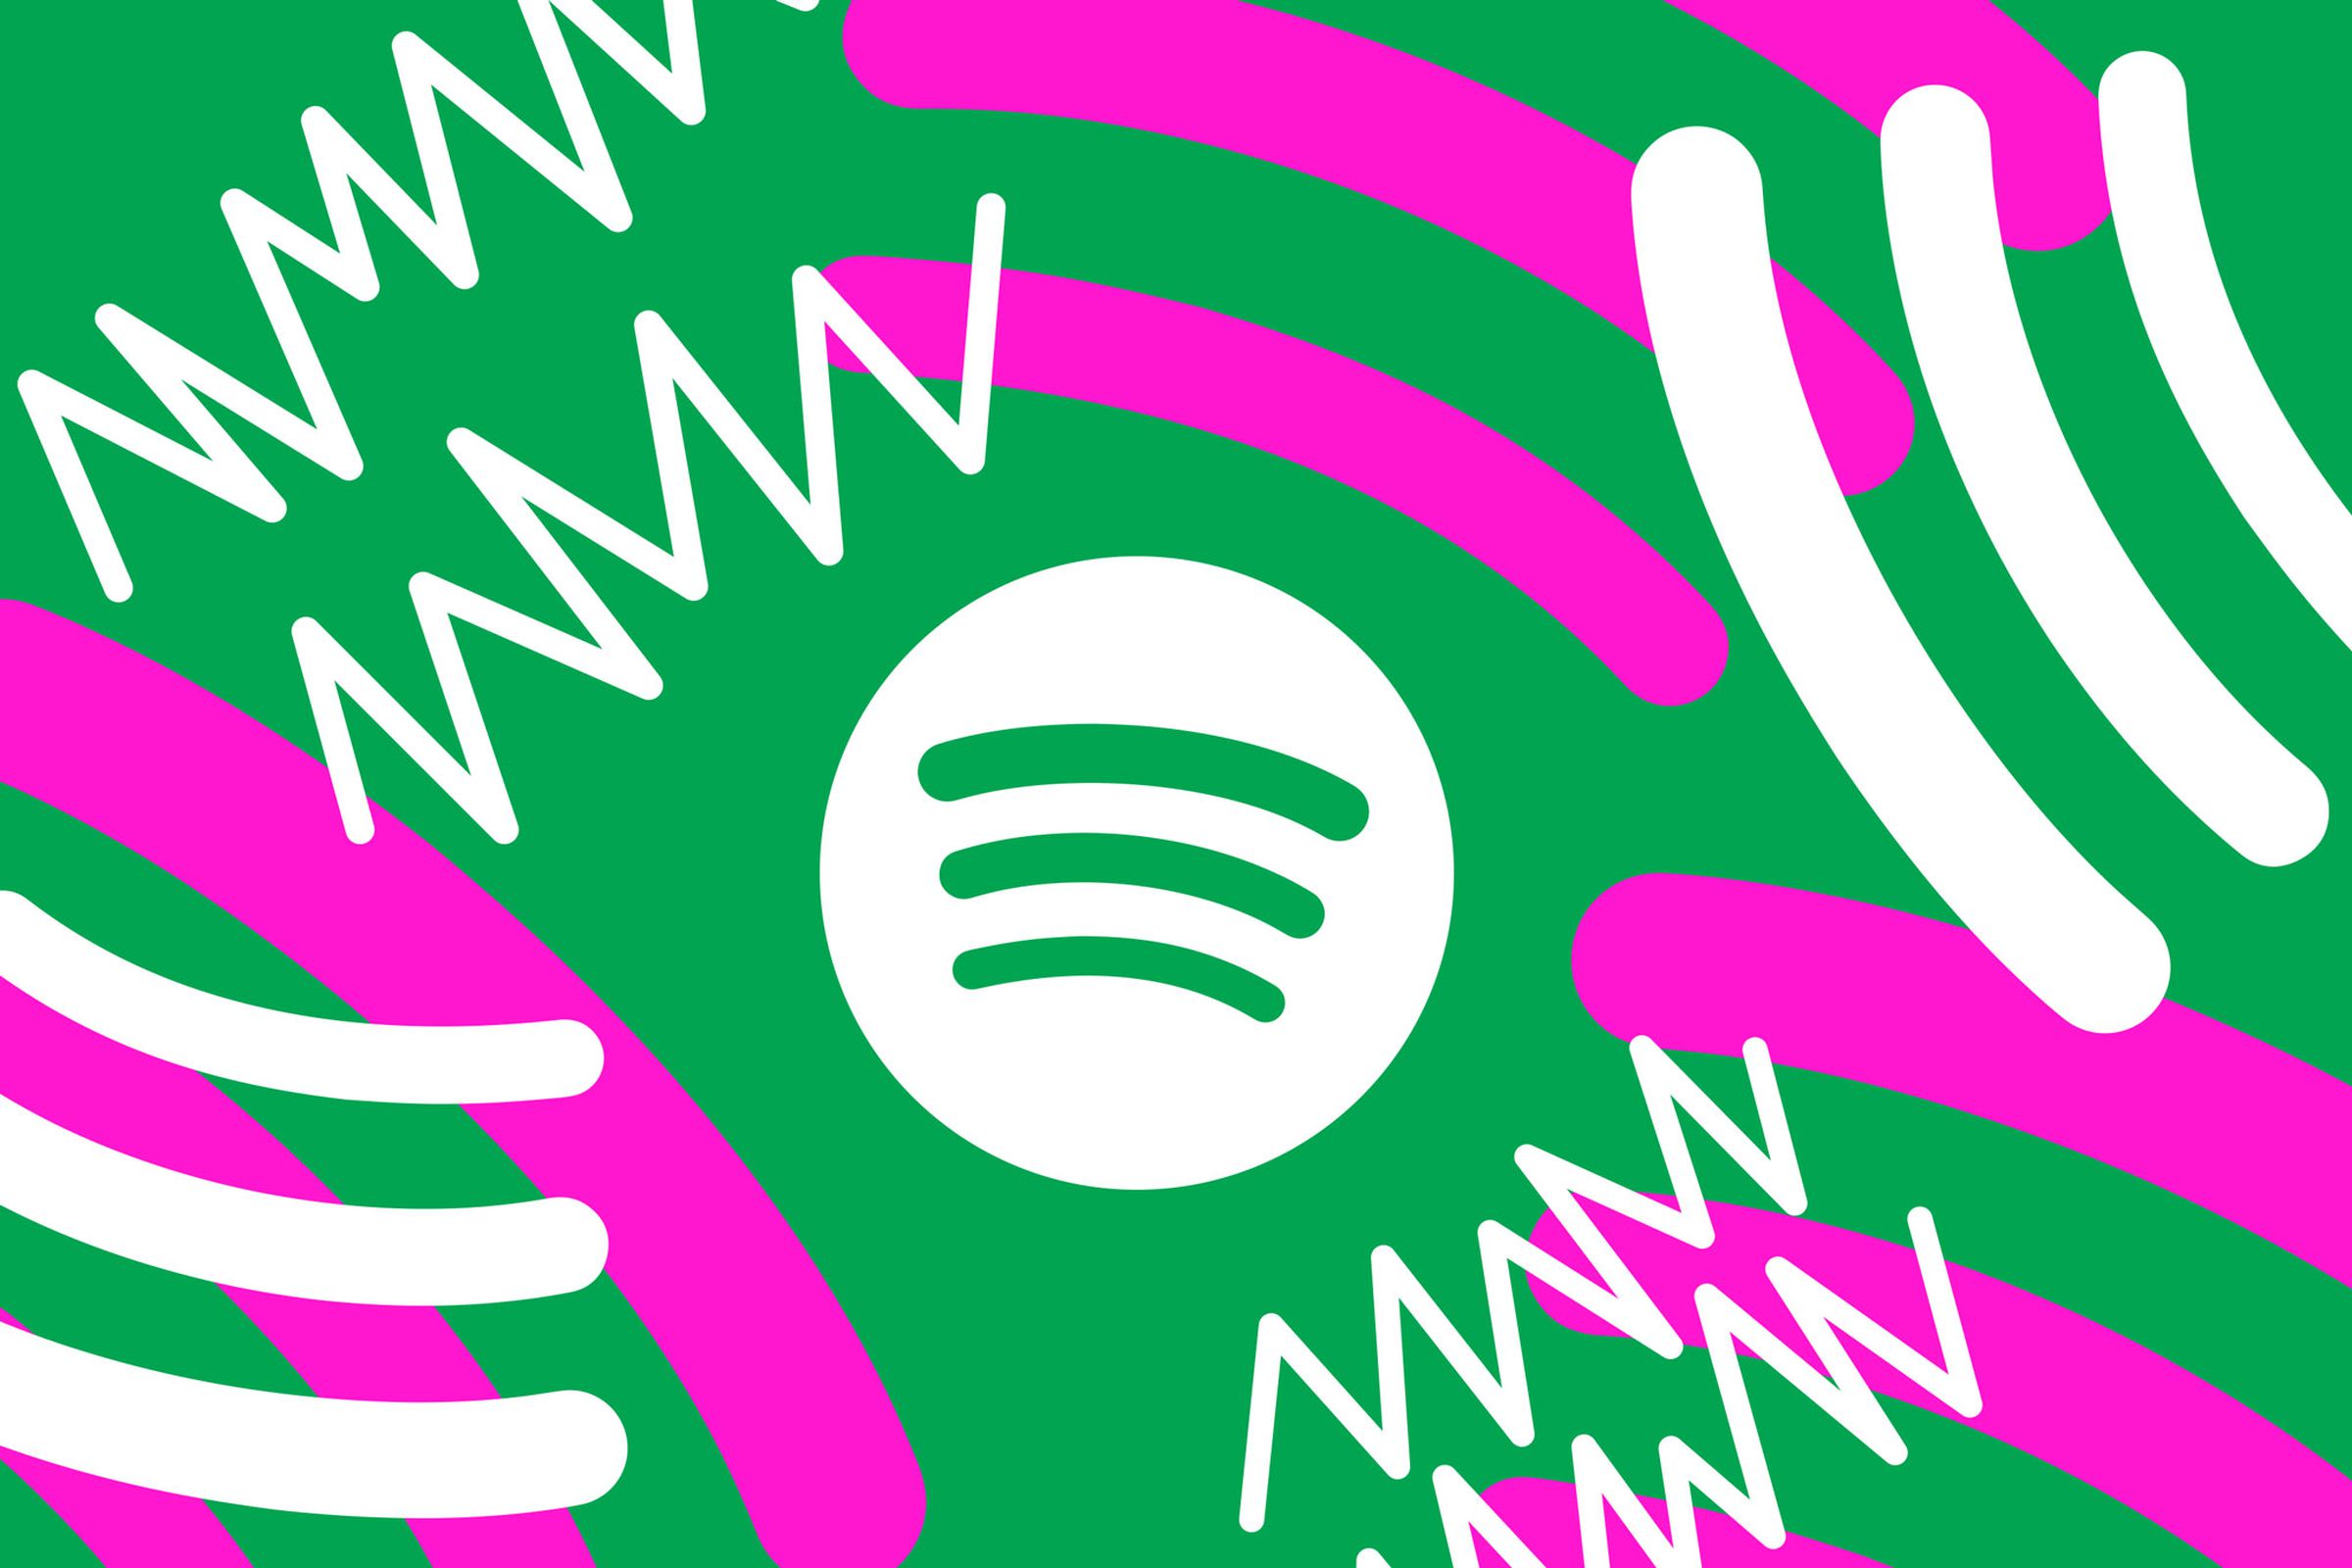 How the Spotify layoffs impact its podcasting business